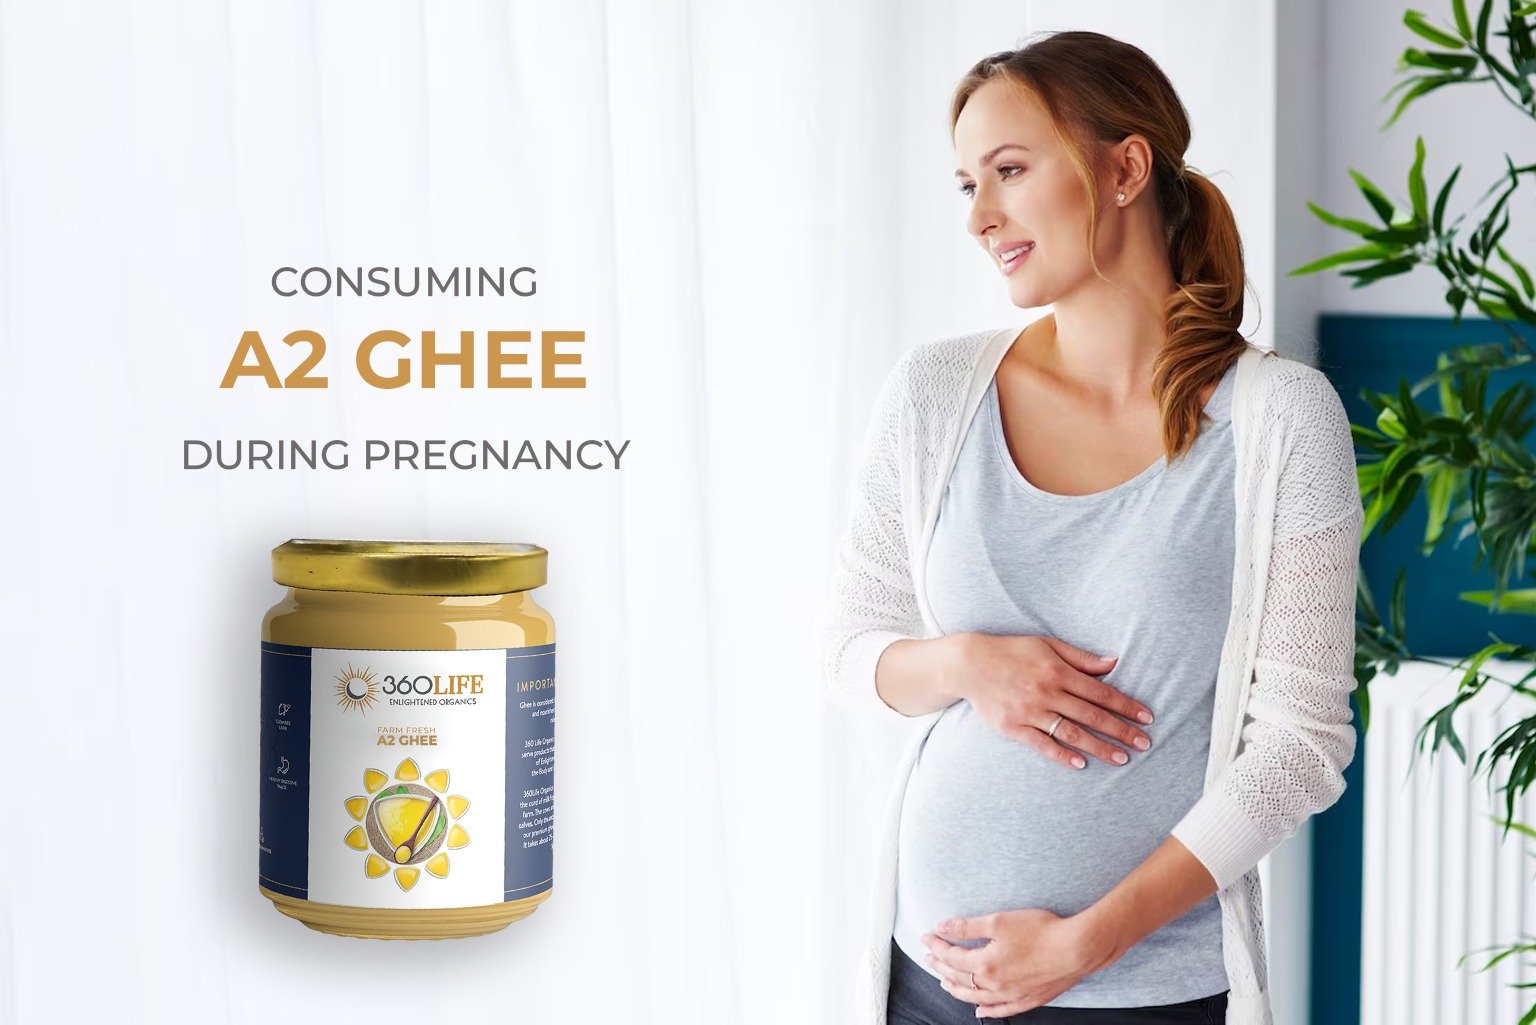 360 life-Consuming A2 Ghee during Pregnancy